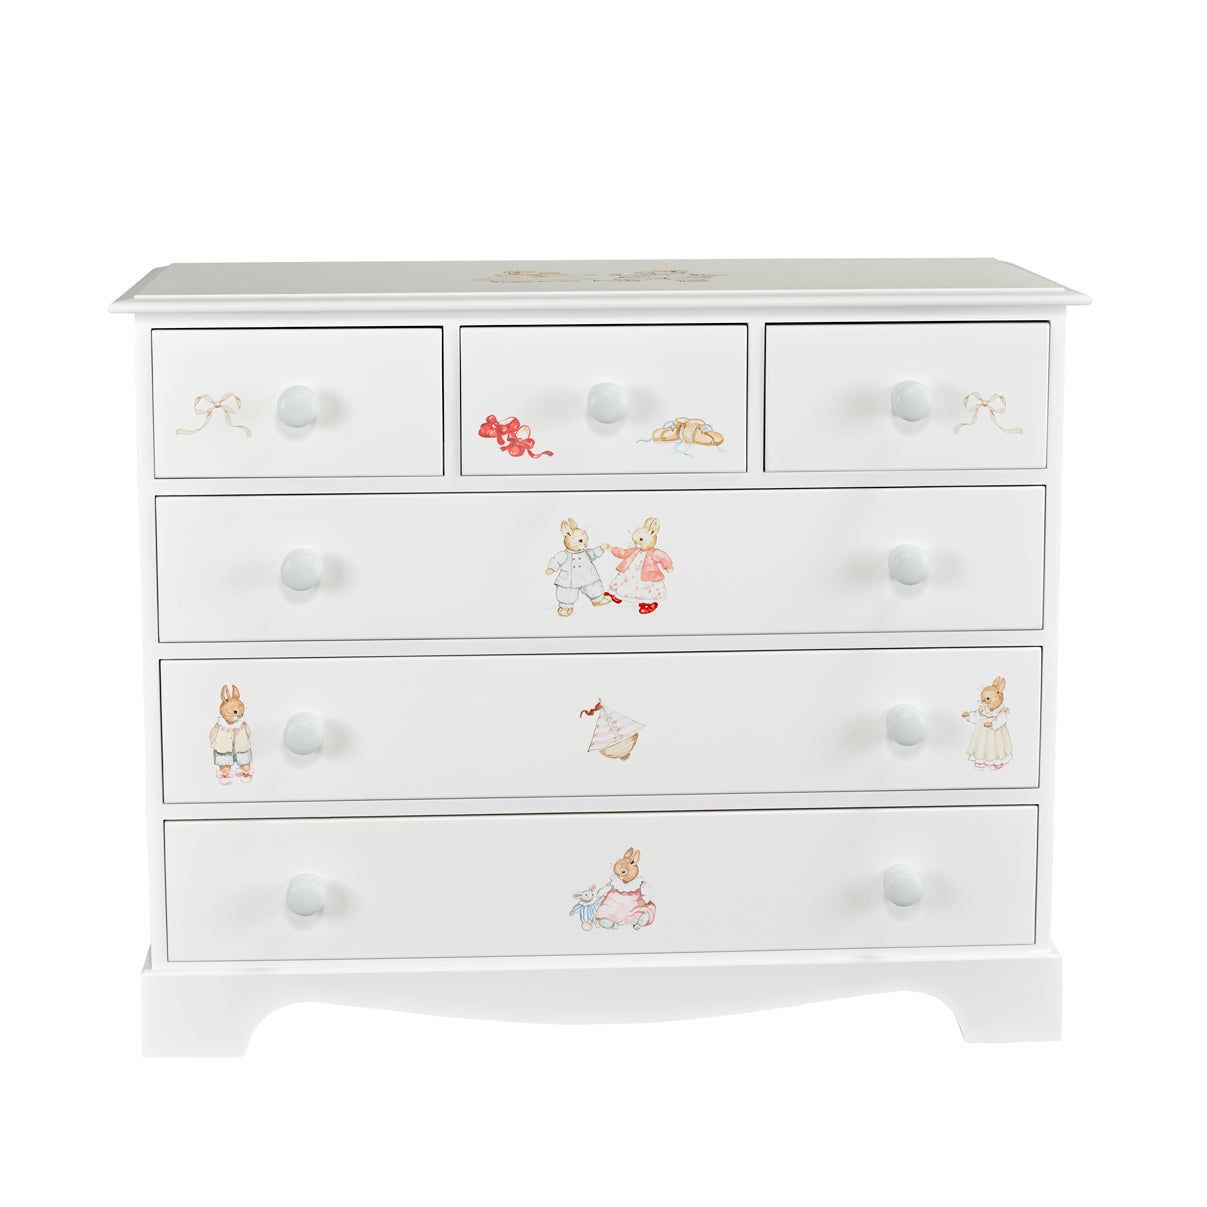 Extra Large Chest of Drawers - Designer Bunnies with Chic Grey Trim